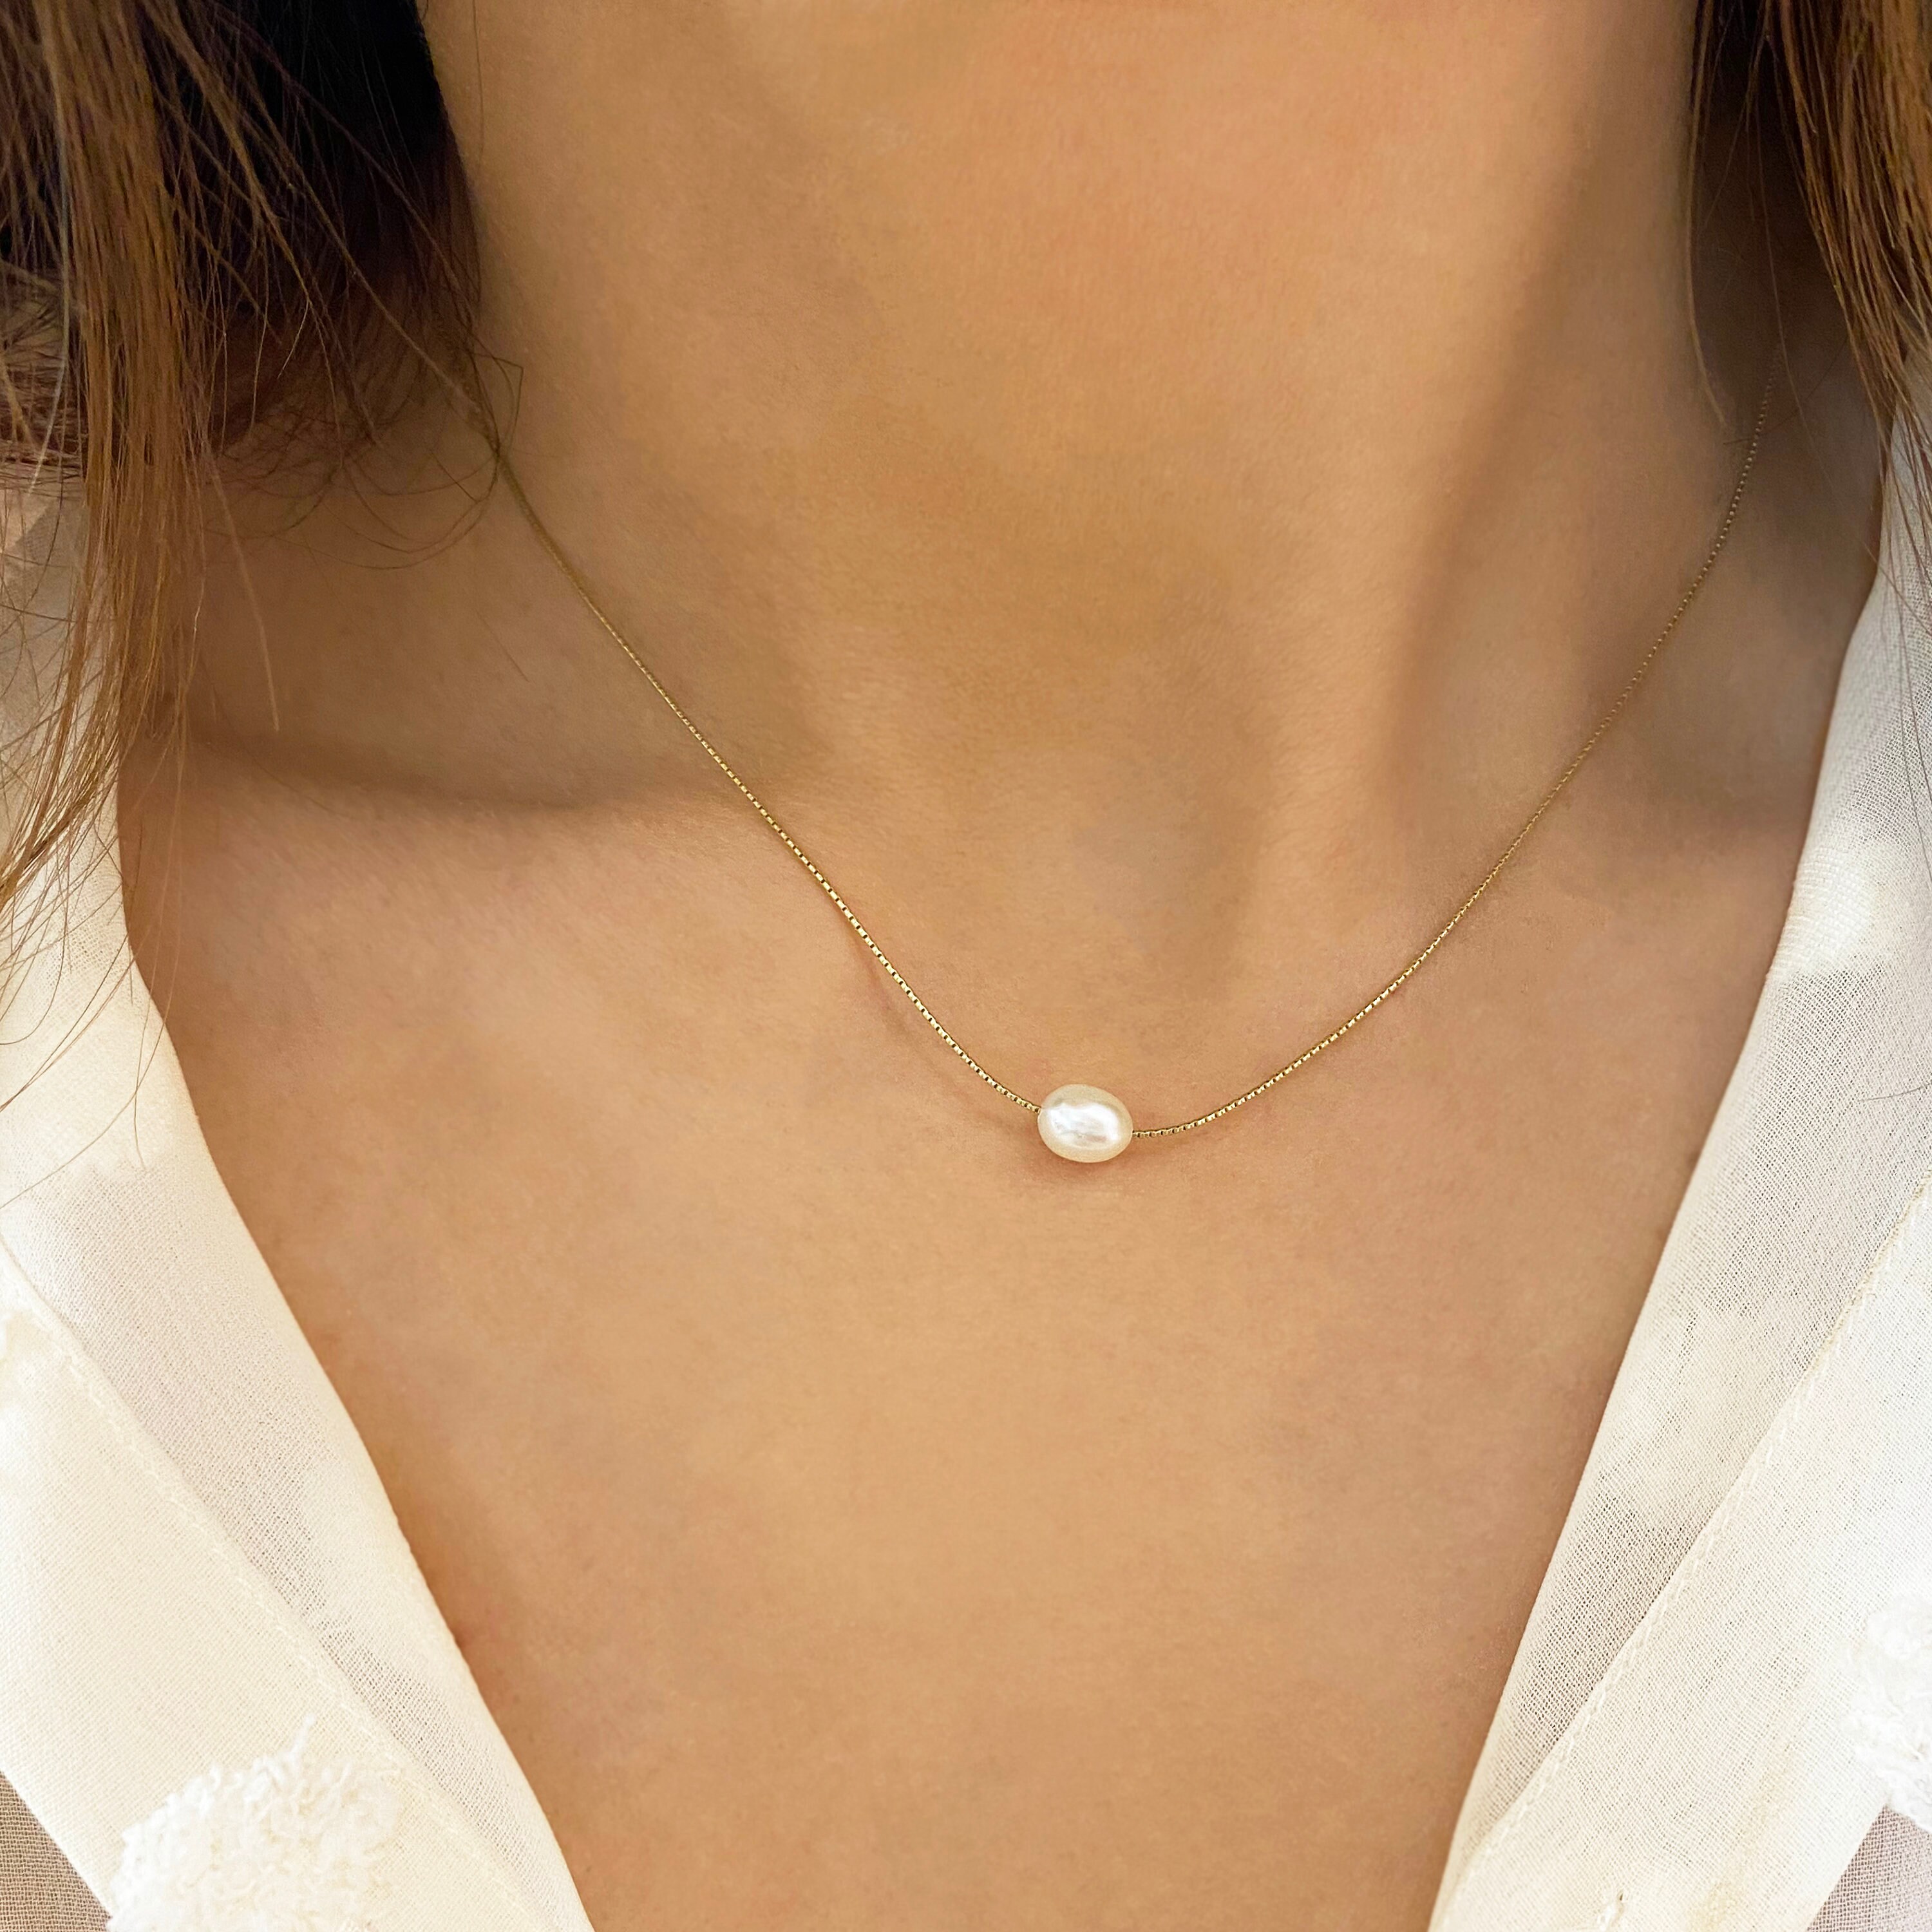 Dainty One Pearl Choker Necklace Silver Gold Chain Minimal Simple 1 Single  Slide